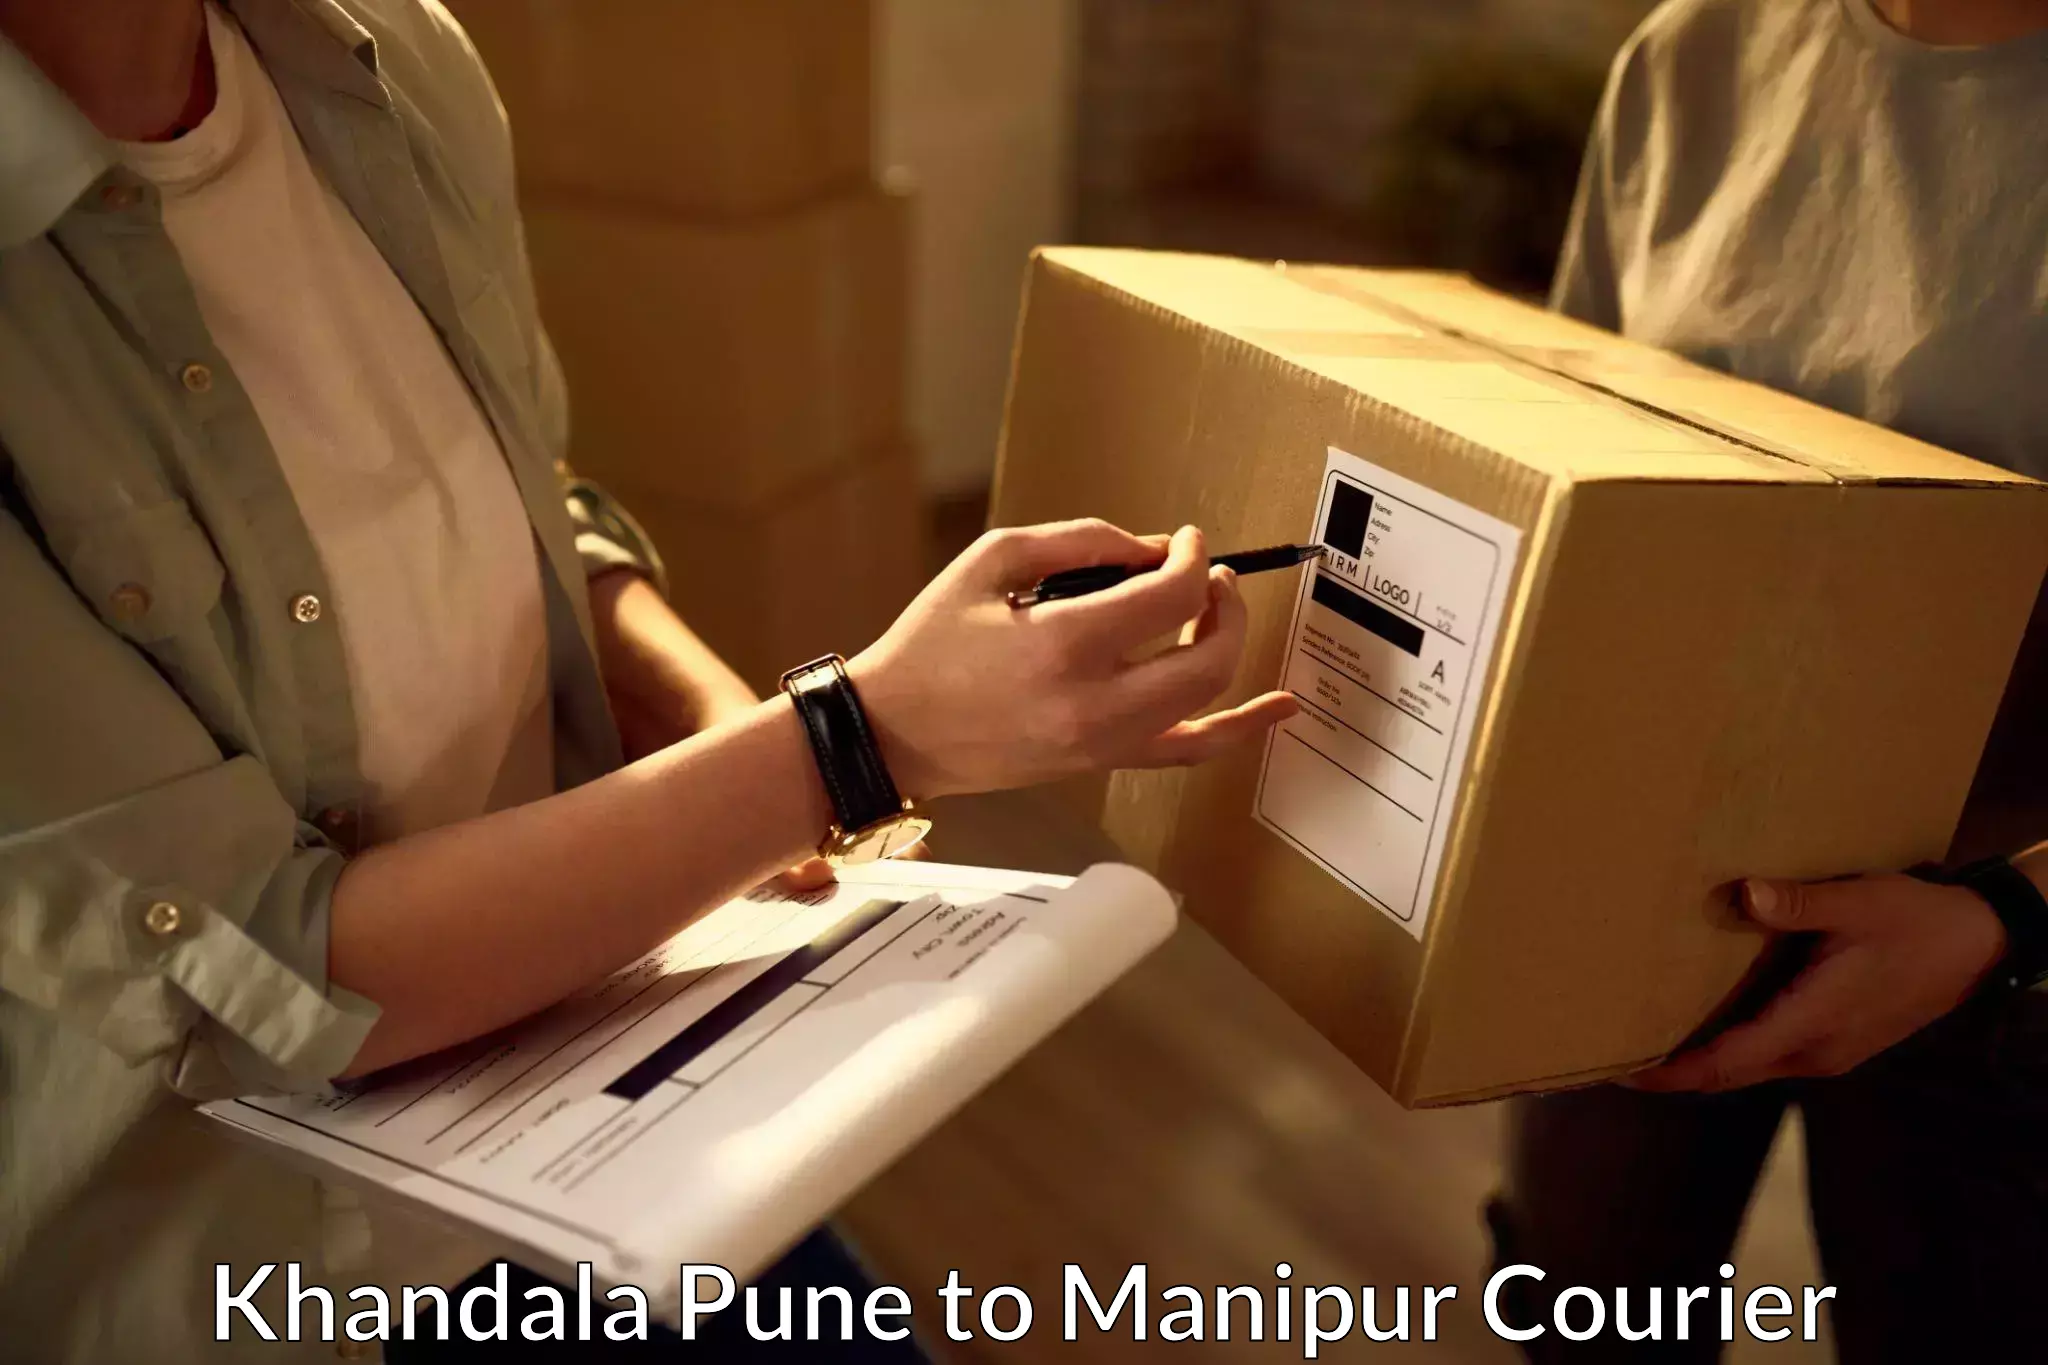 On-call courier service Khandala Pune to Imphal